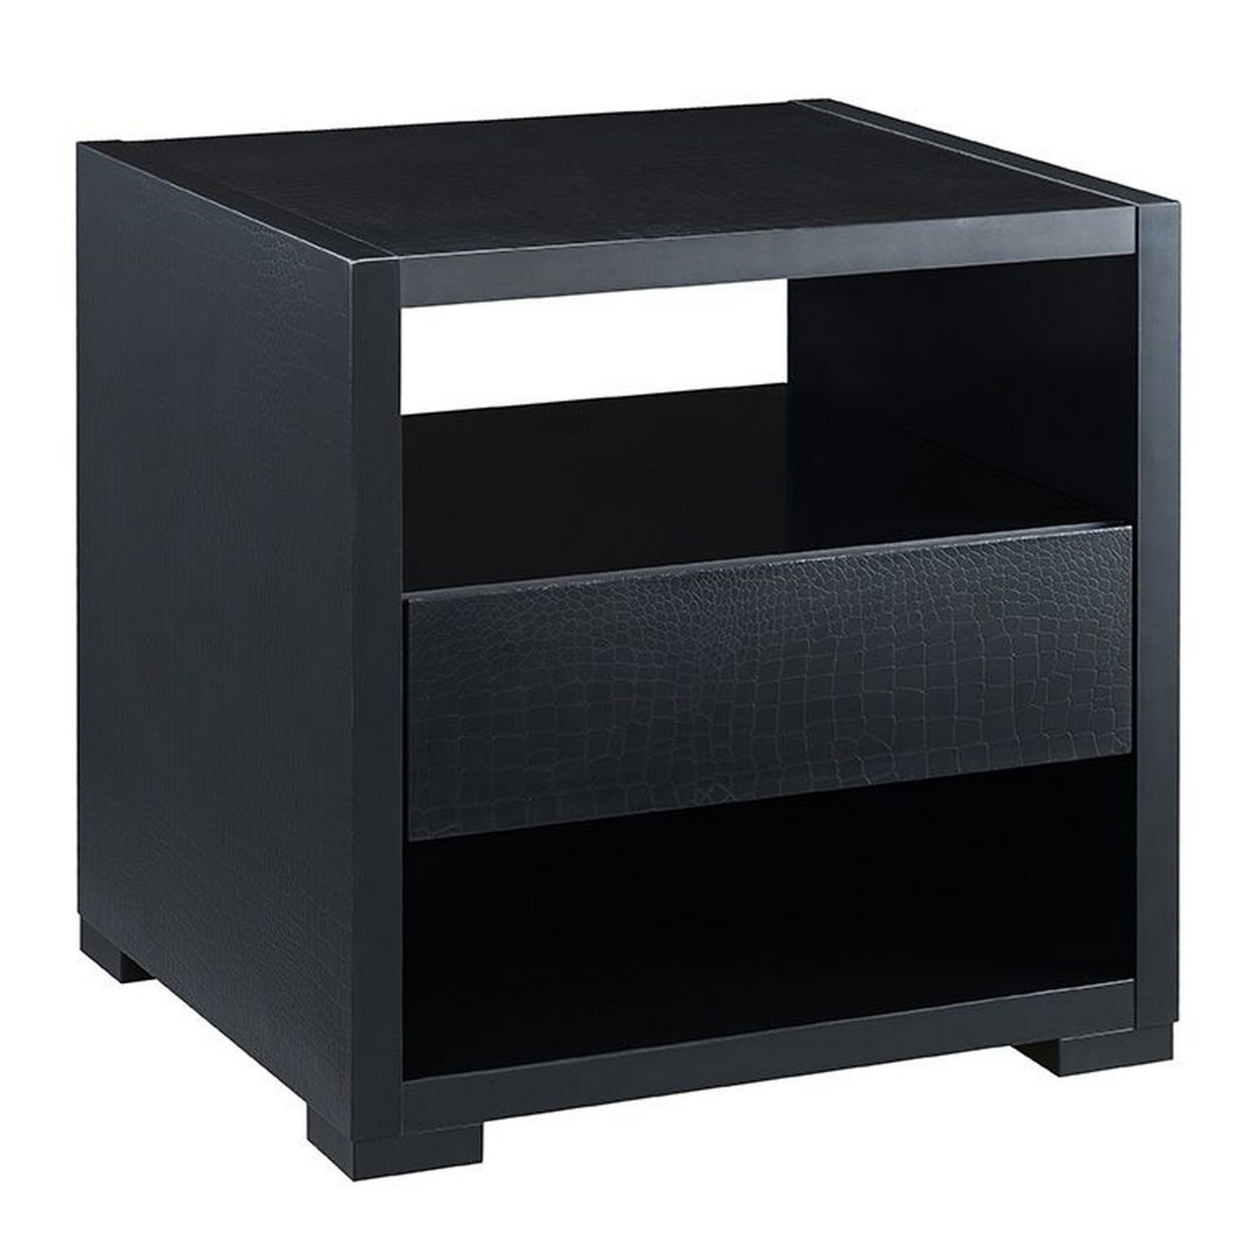 End Table With 2 Drawers And Open Compartments, Black- Saltoro Sherpi